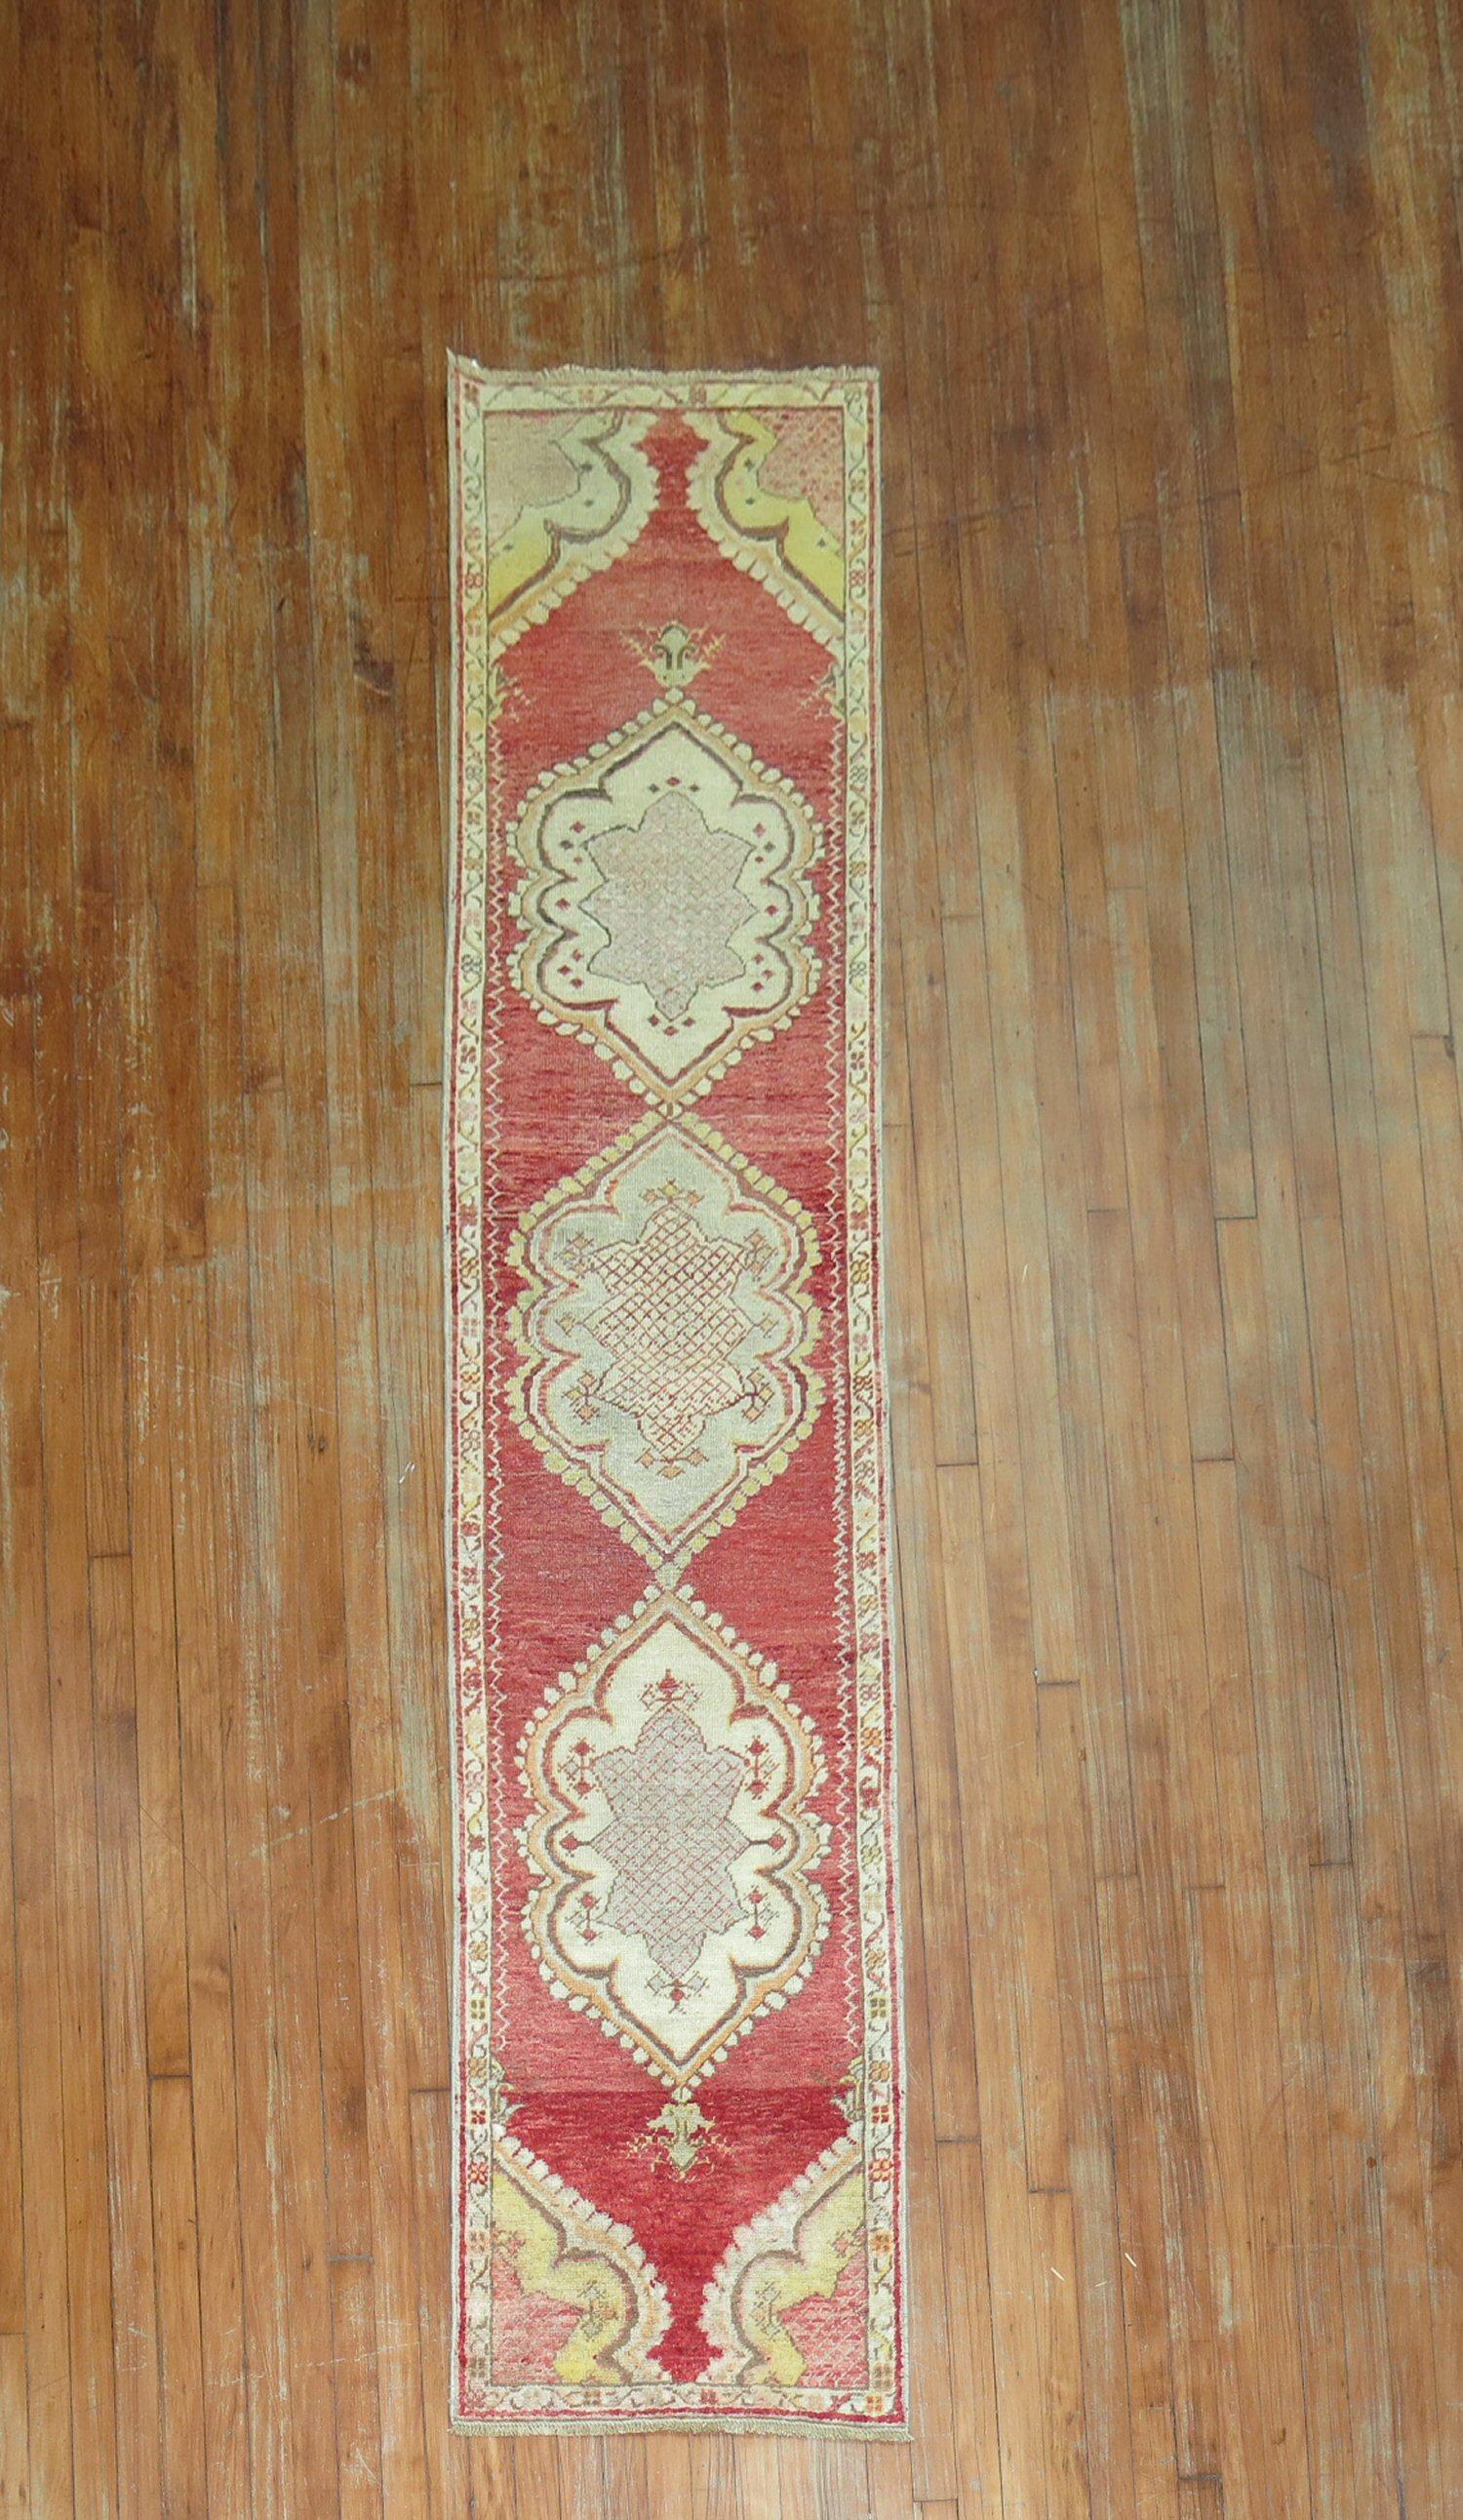 A lovely Turkish runner from the middle of the 20th century with a floral motif on a red field

Measures: 2'x 8'9''.